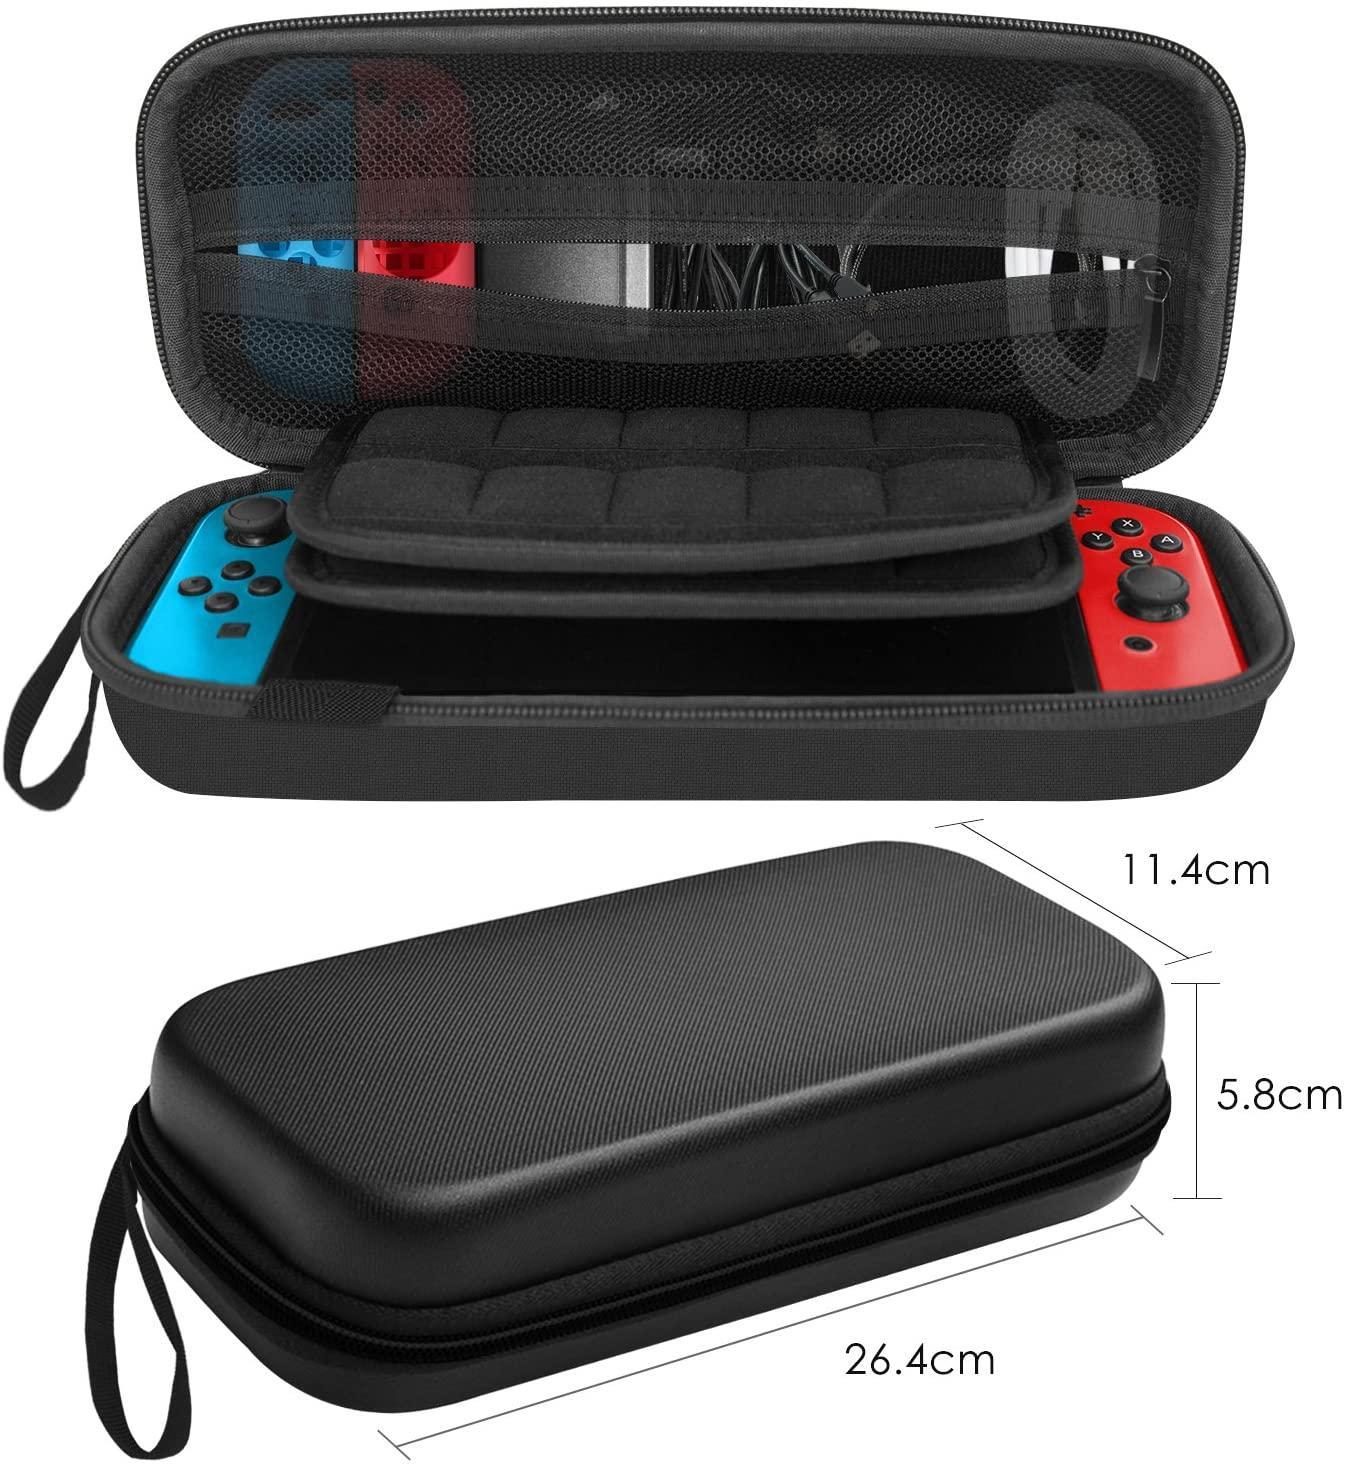 Nintendo Switch Carry Case